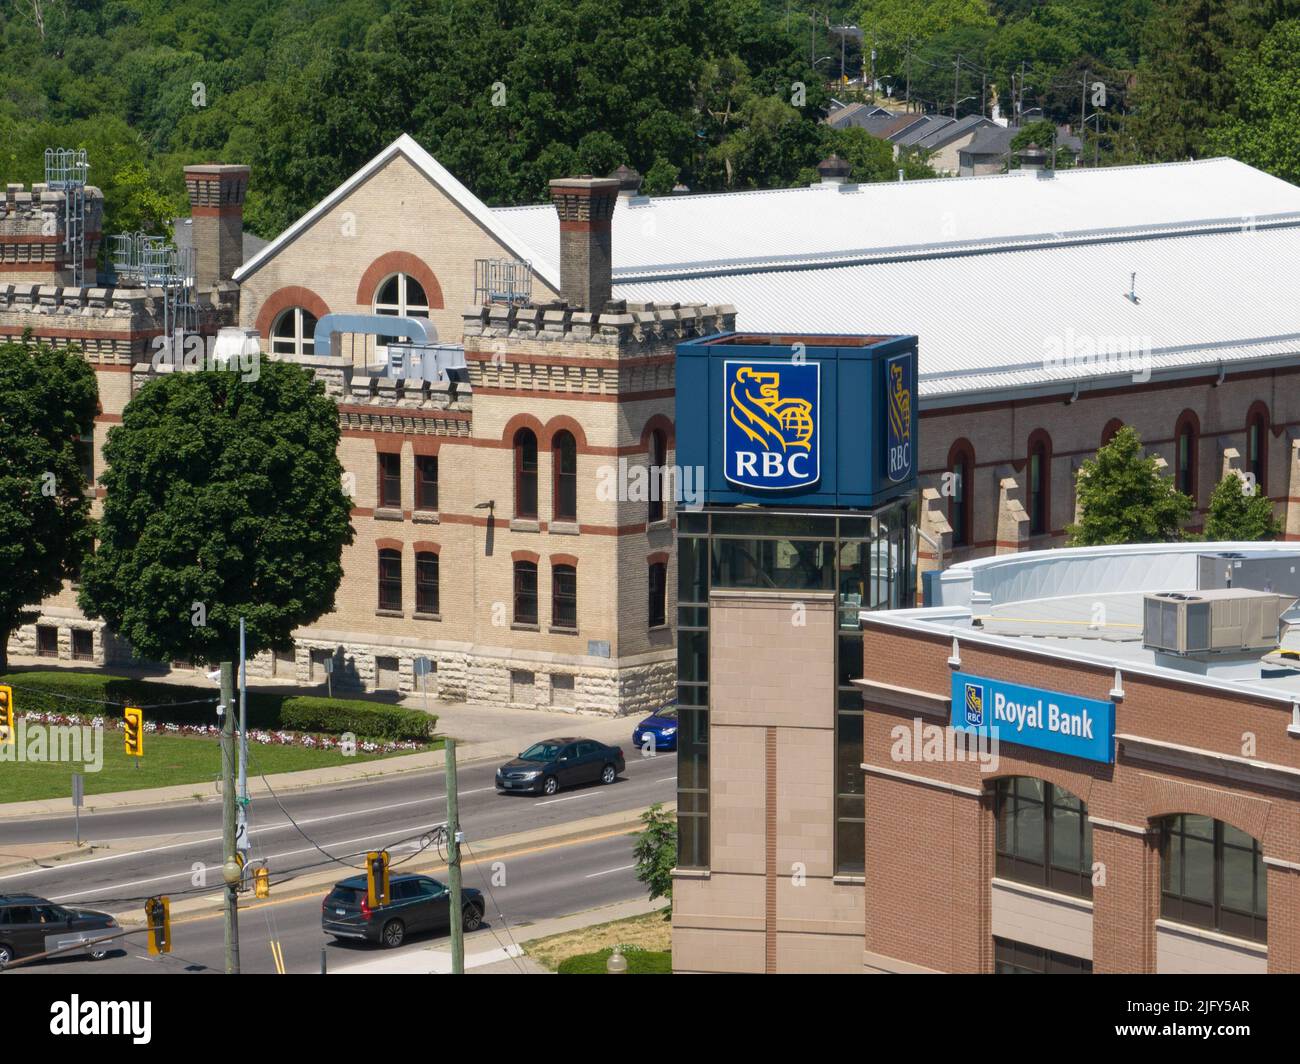 An aerial view of an RBC branch, Royal Bank of Canada, in an urban area, city centre. Stock Photo